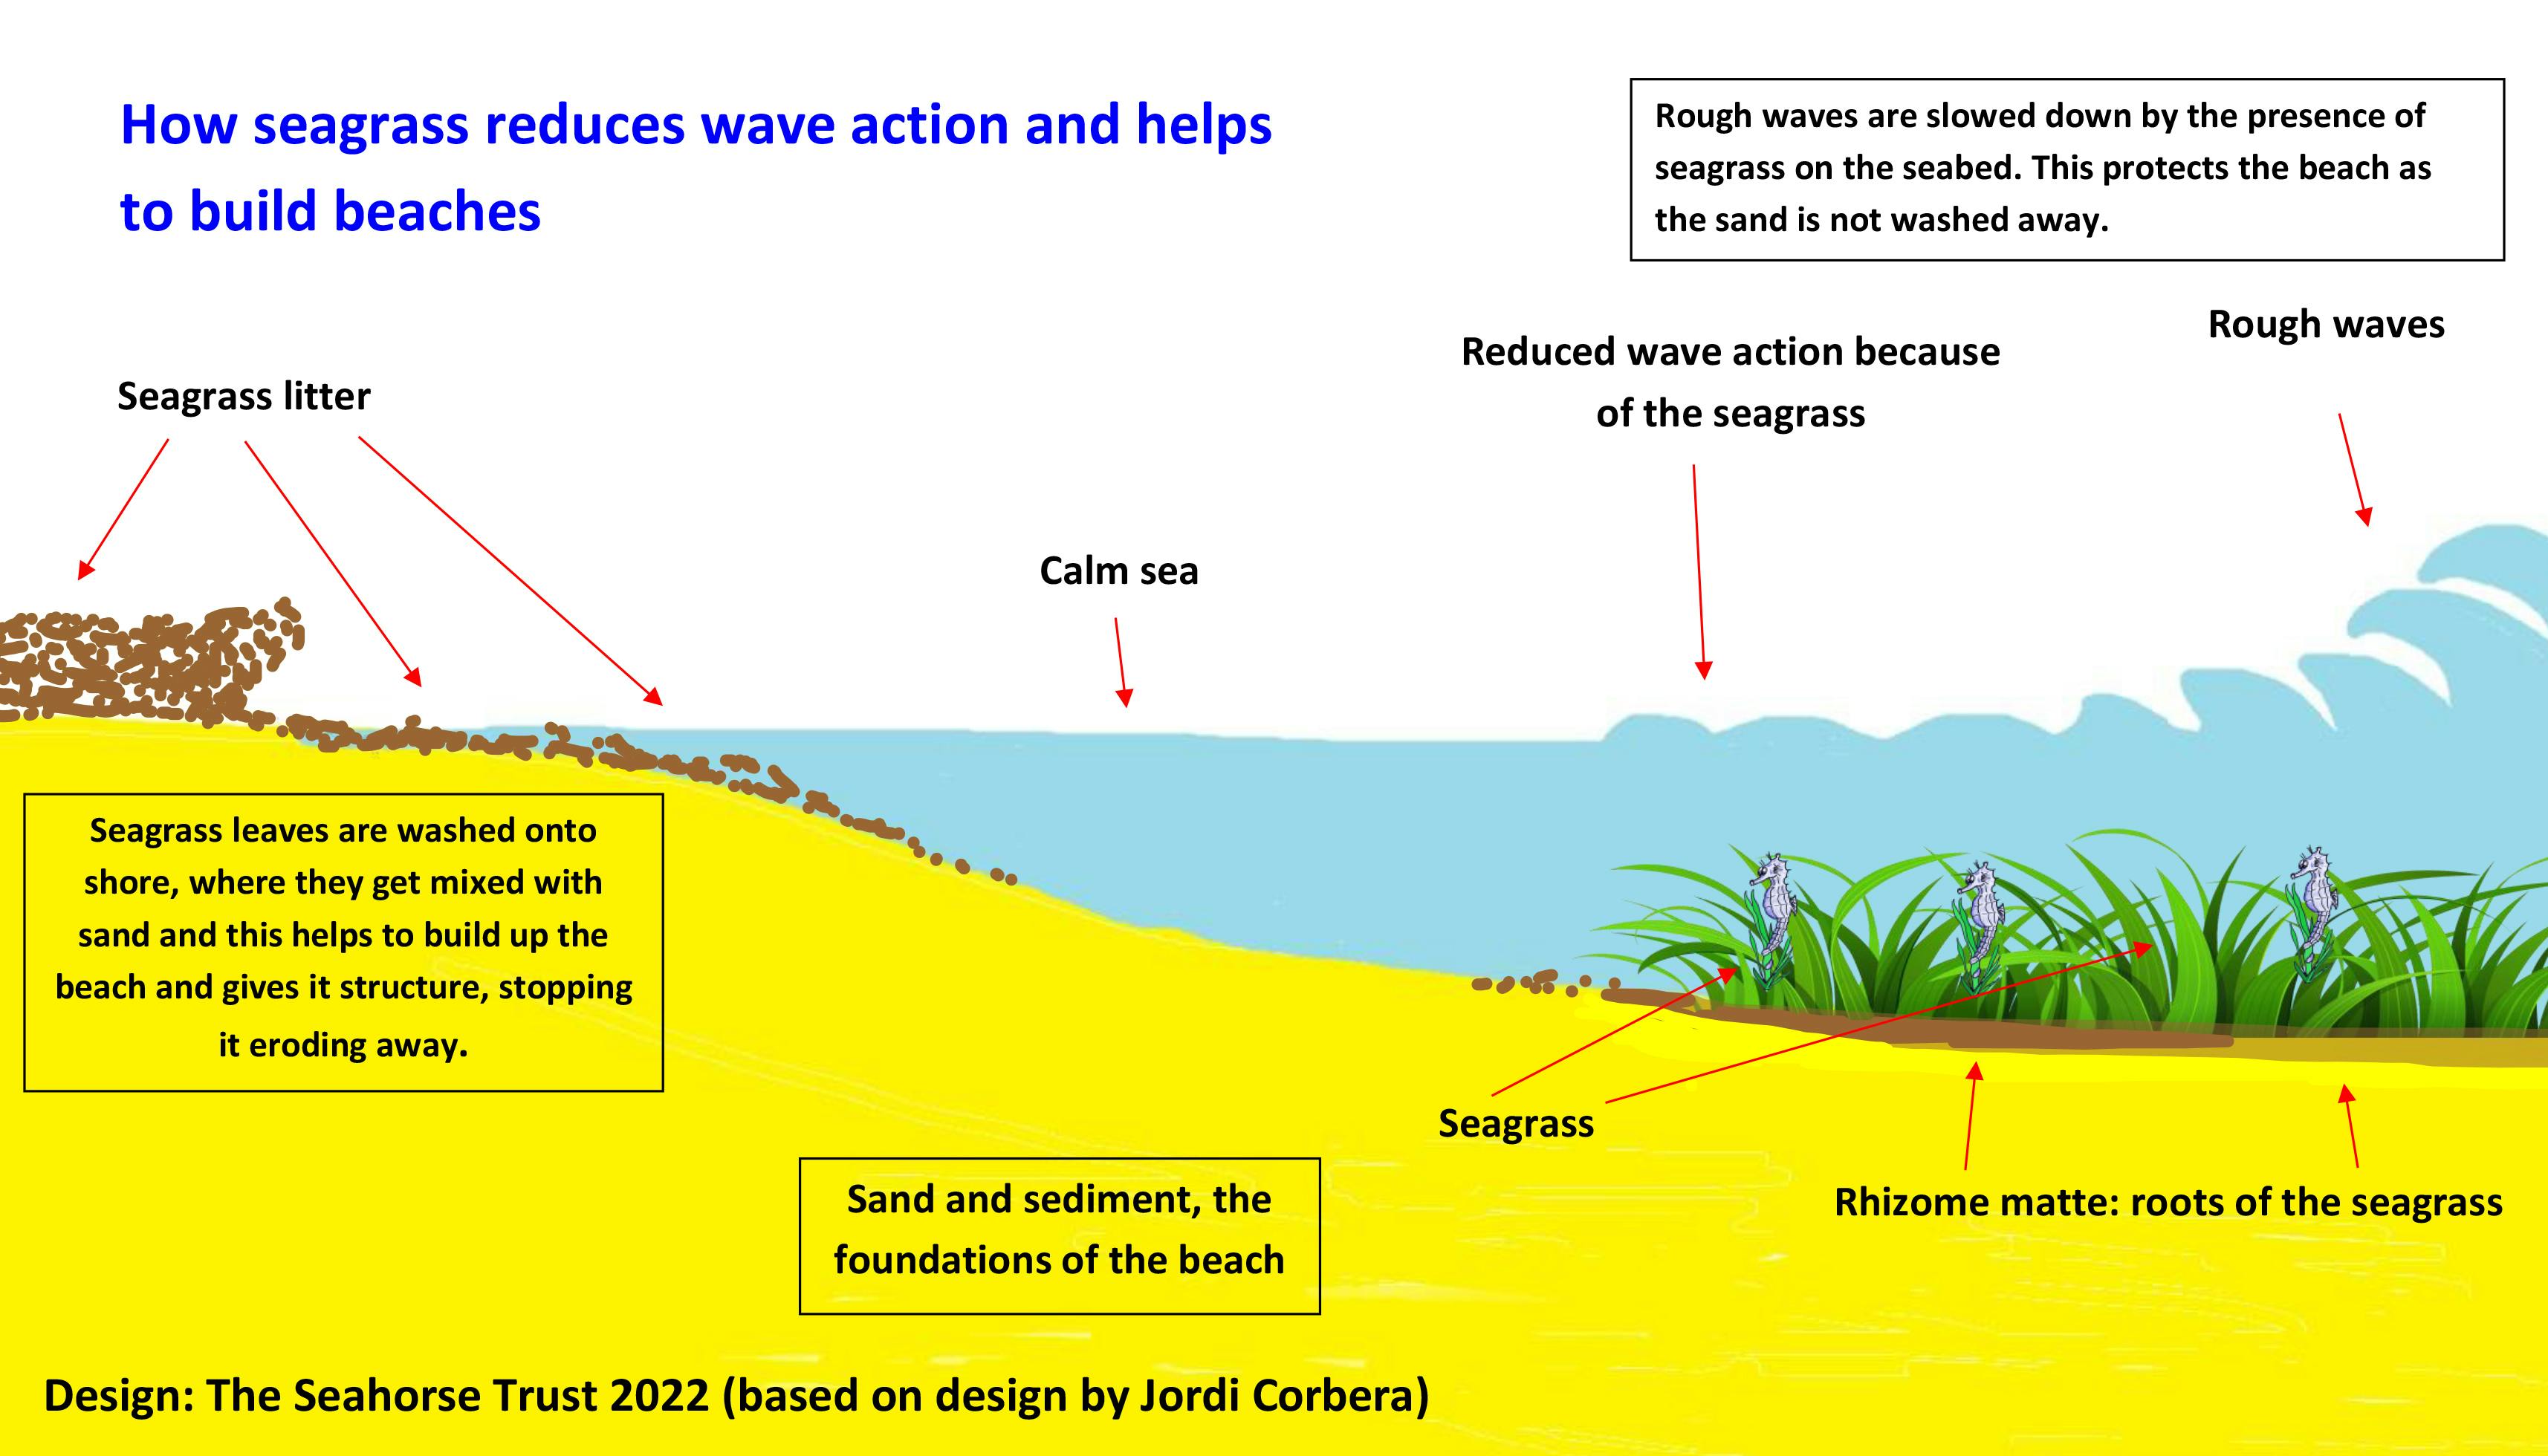 Seagrass action